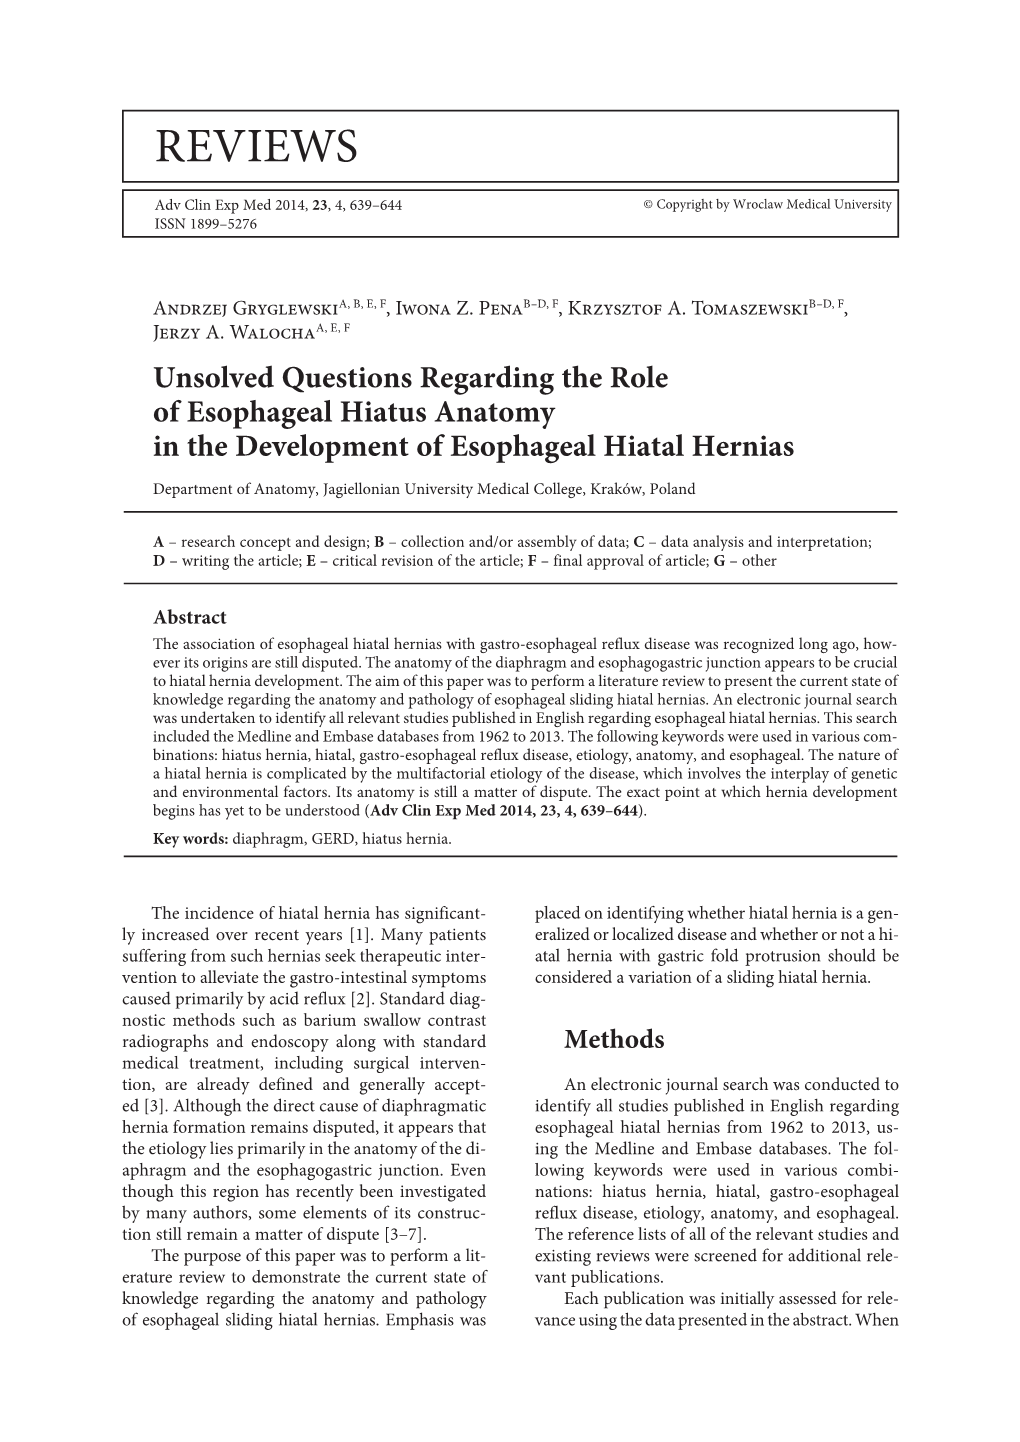 Unsolved Questions Regarding the Role of Esophageal Hiatus Anatomy in the Development of Esophageal Hiatal Hernias